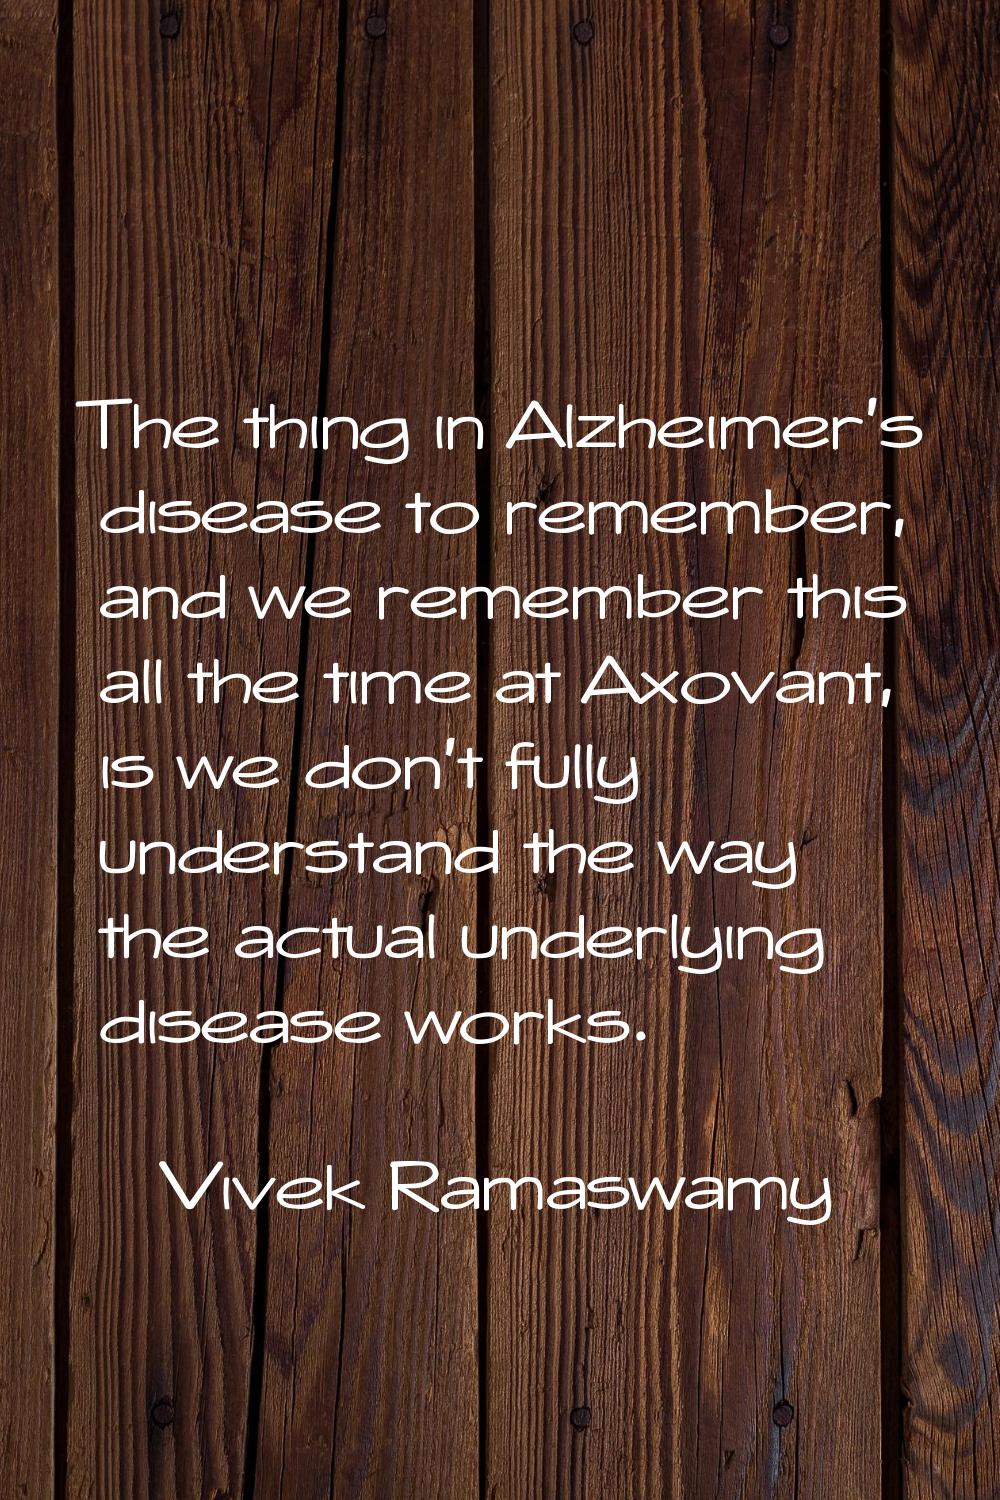 The thing in Alzheimer's disease to remember, and we remember this all the time at Axovant, is we d